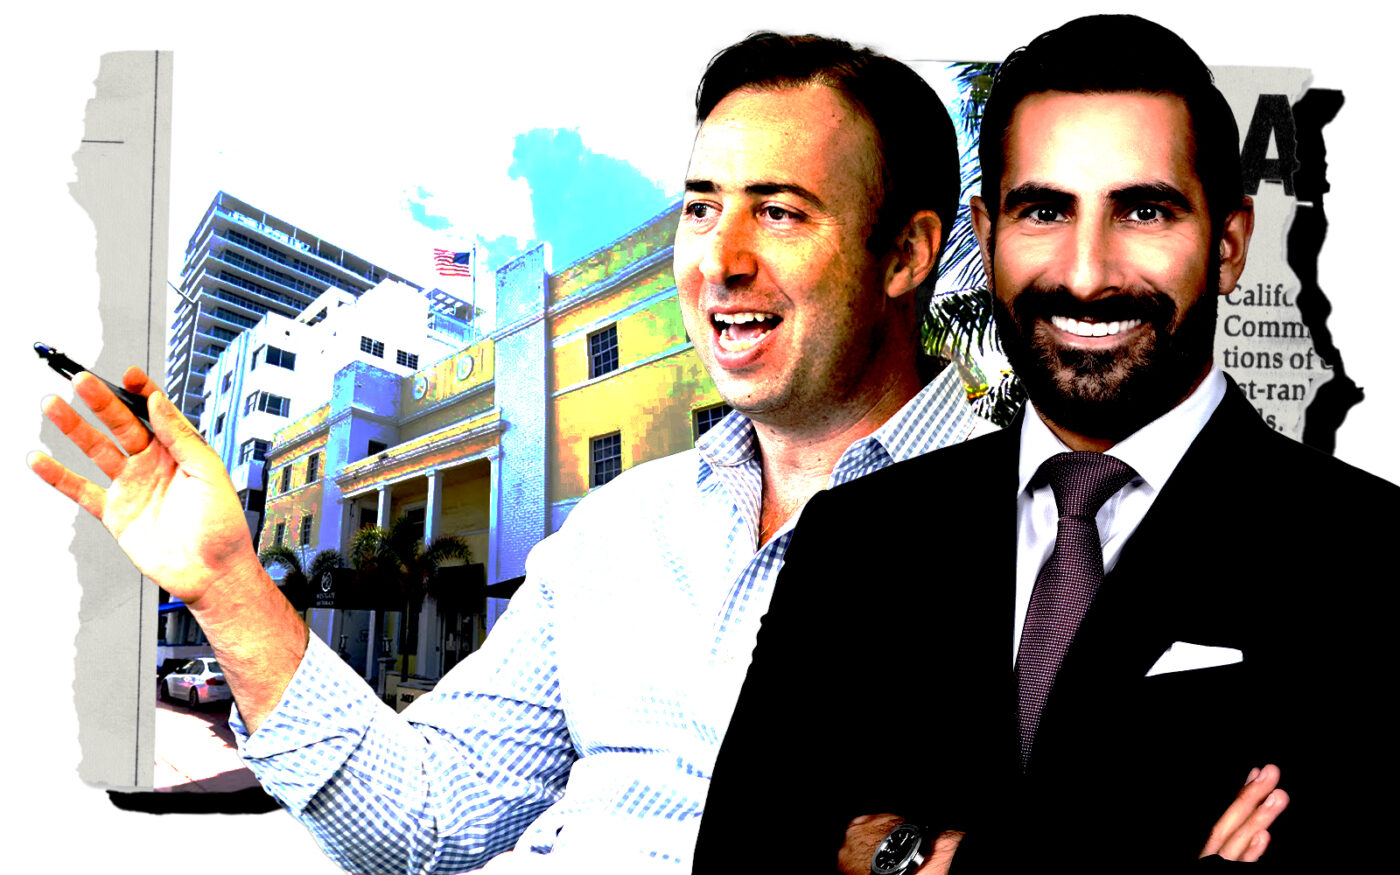 From left: 13th Floor’s Arnaud Karsenti, Opera Acquisitions President Valerio Spinaci and the Westgate South Beach Oceanfront Resort (Getty, 13th Floor, Opera Acquisitions, Google Maps)